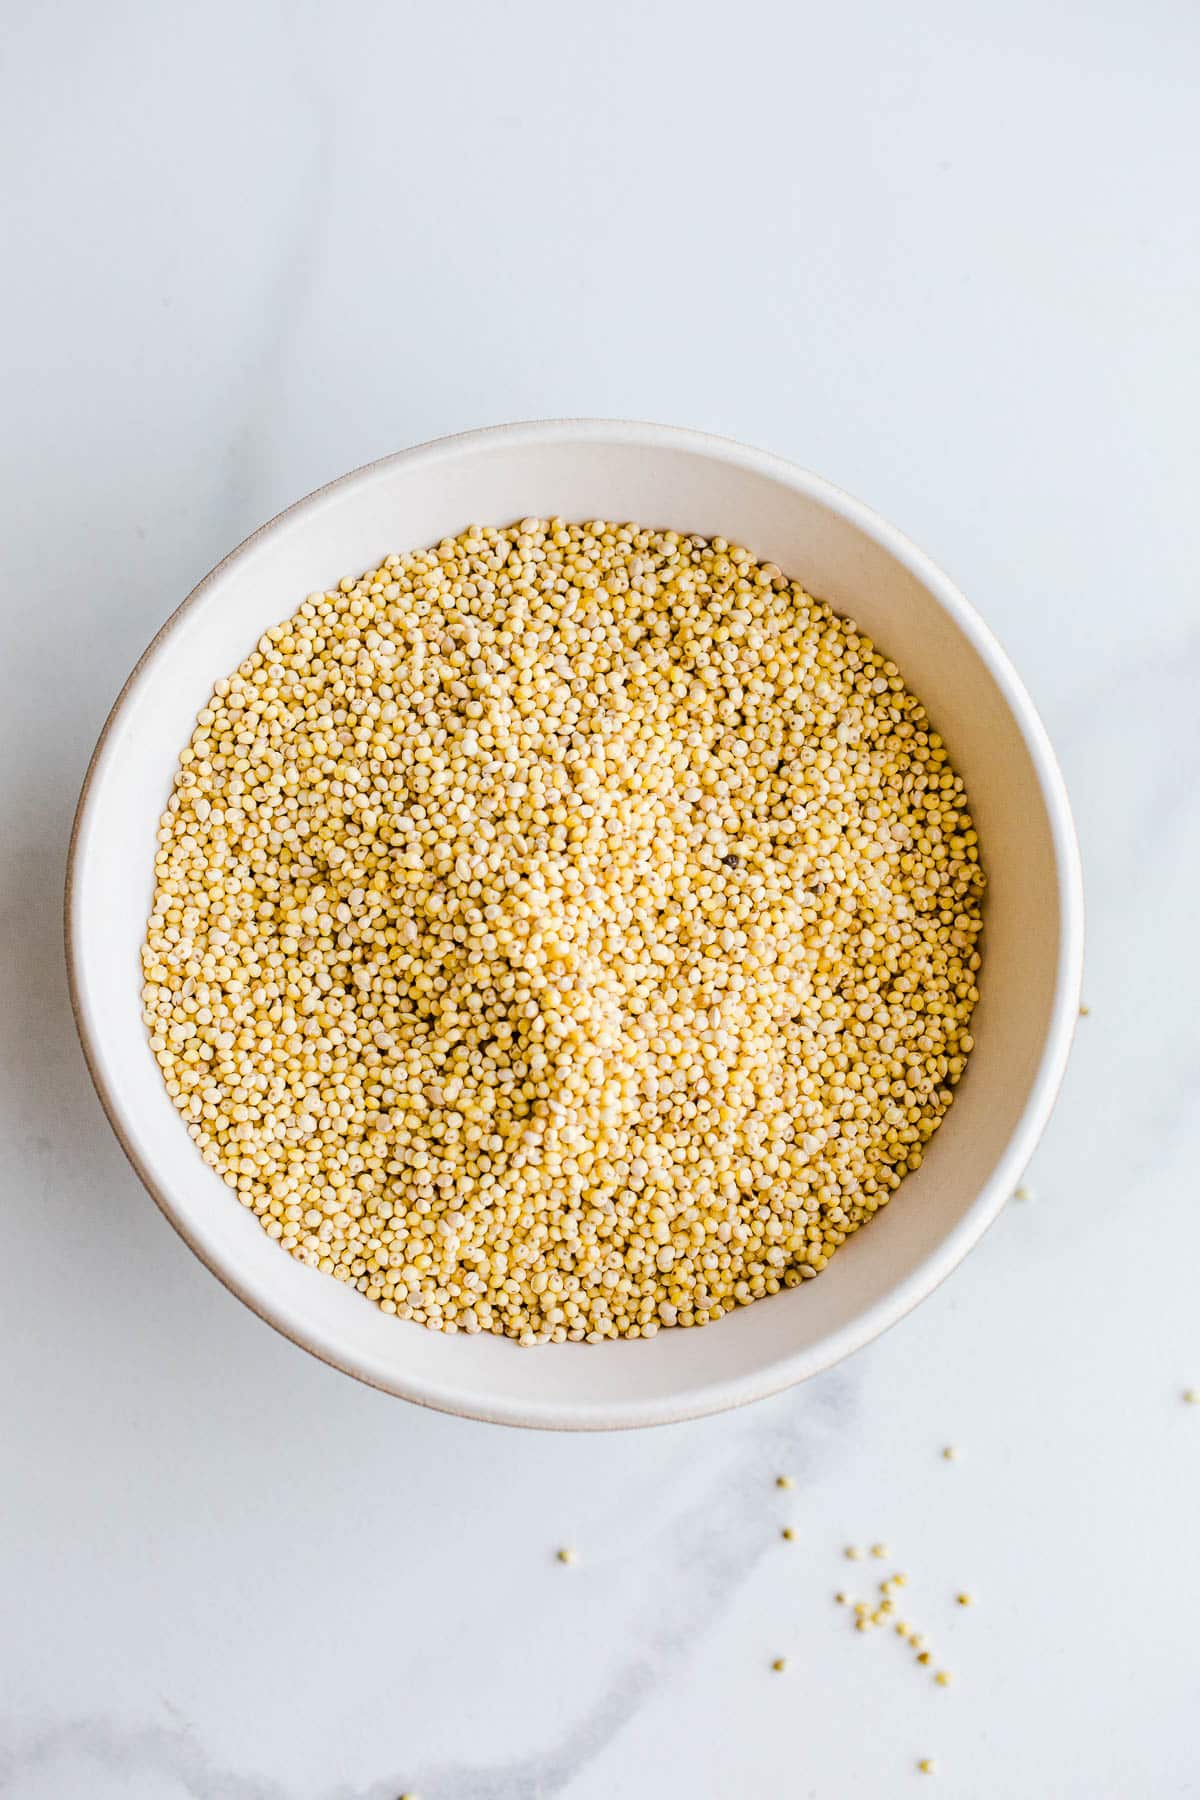 Whole millet grains in a small white bowl.